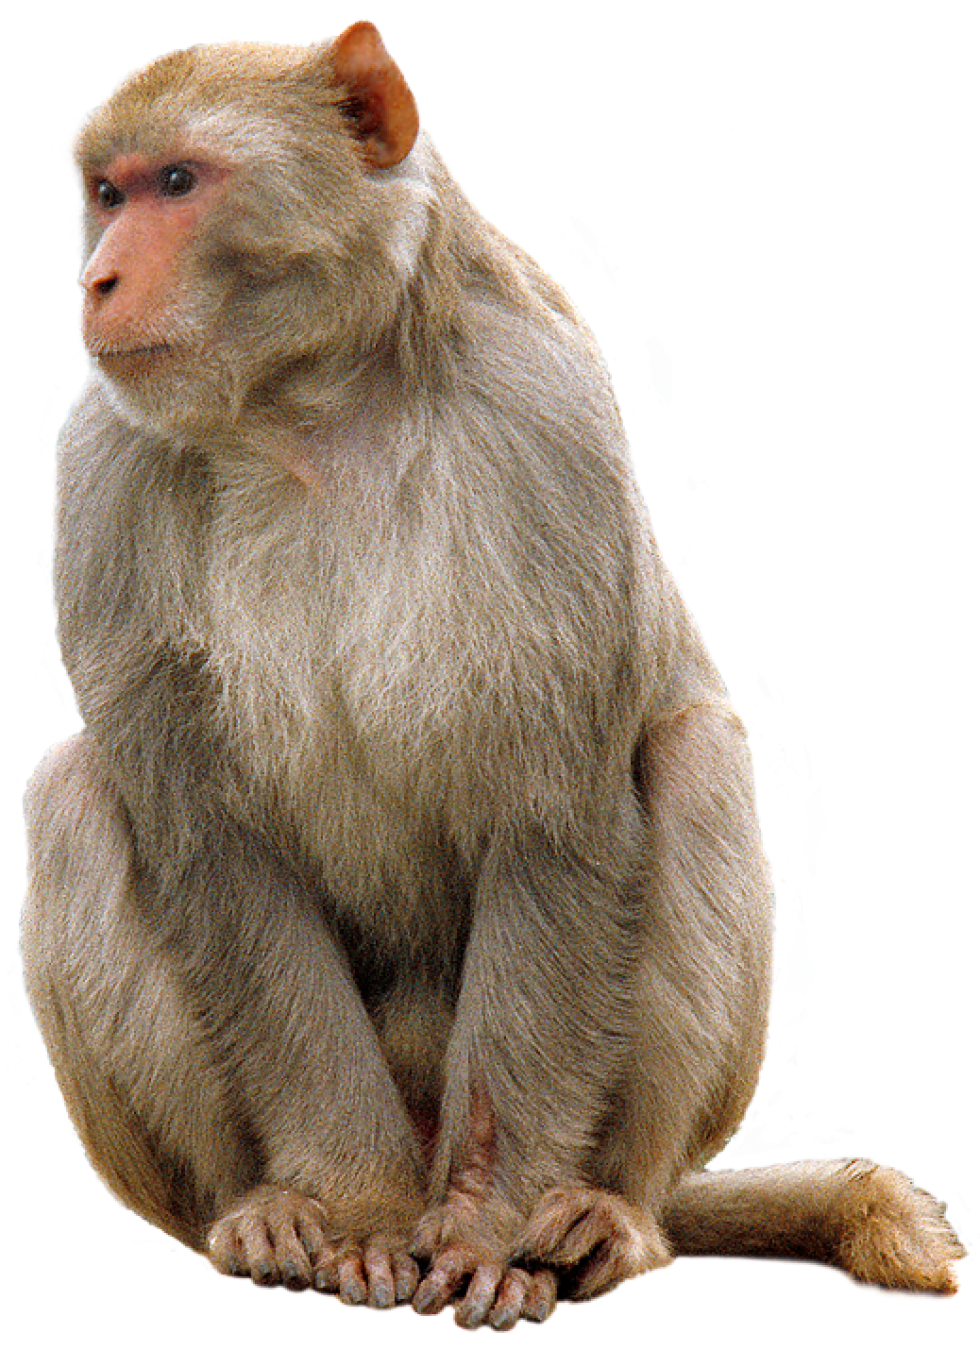 Lizard Baboon Stinker Awesome Ecology PNG